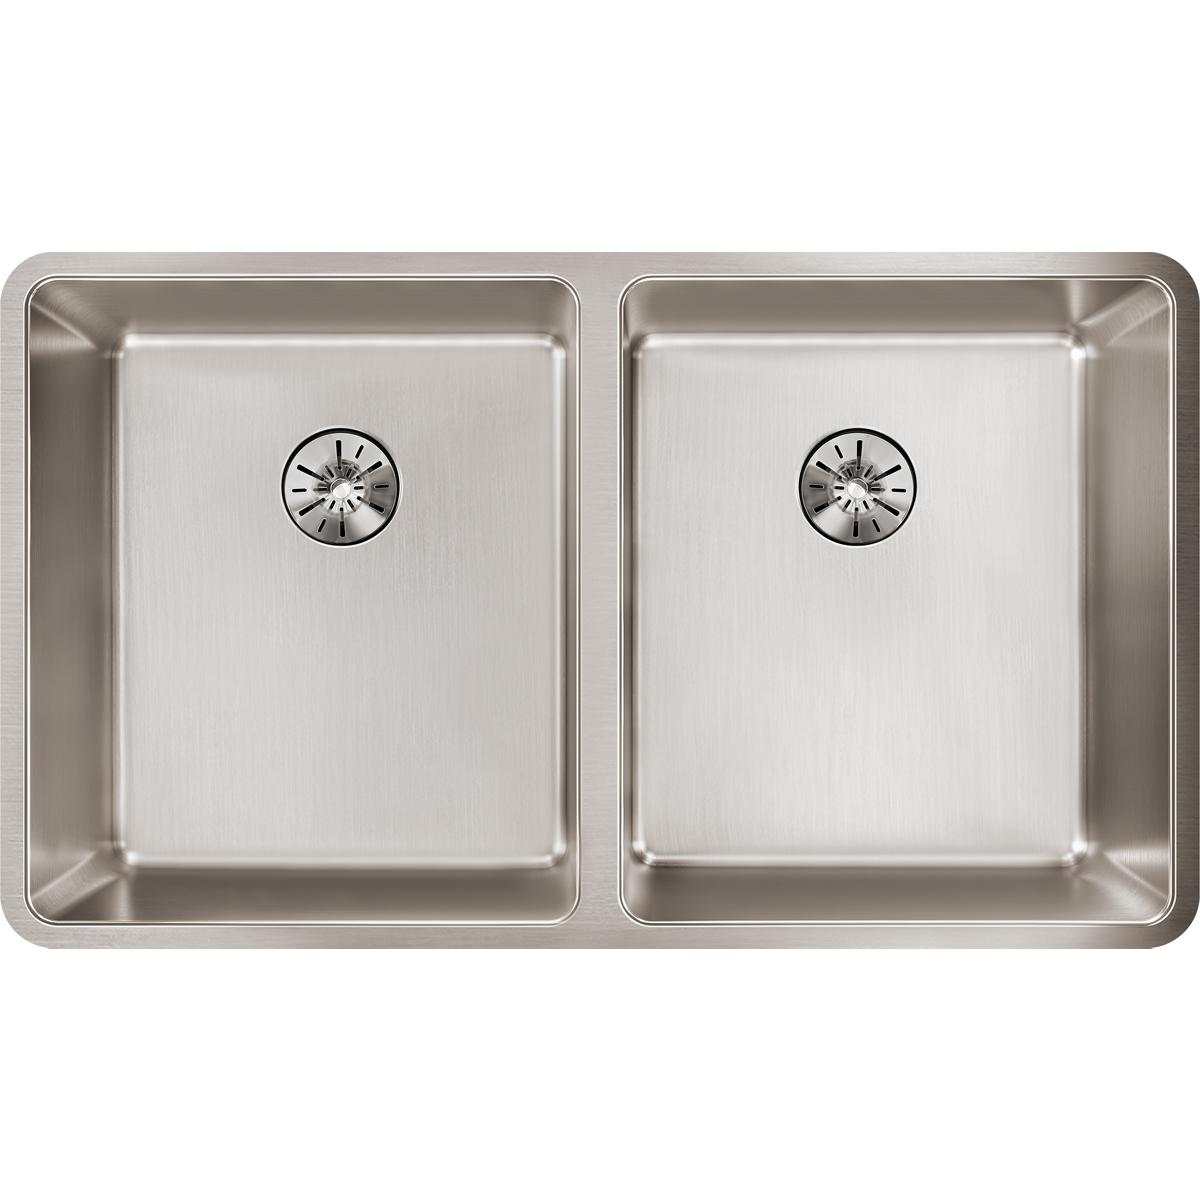 Elkay Lustertone Iconix Stainless Steel 32-3/4" x 19-1/2" x 9" Double Bowl Undermount Sink with Perfect Drain